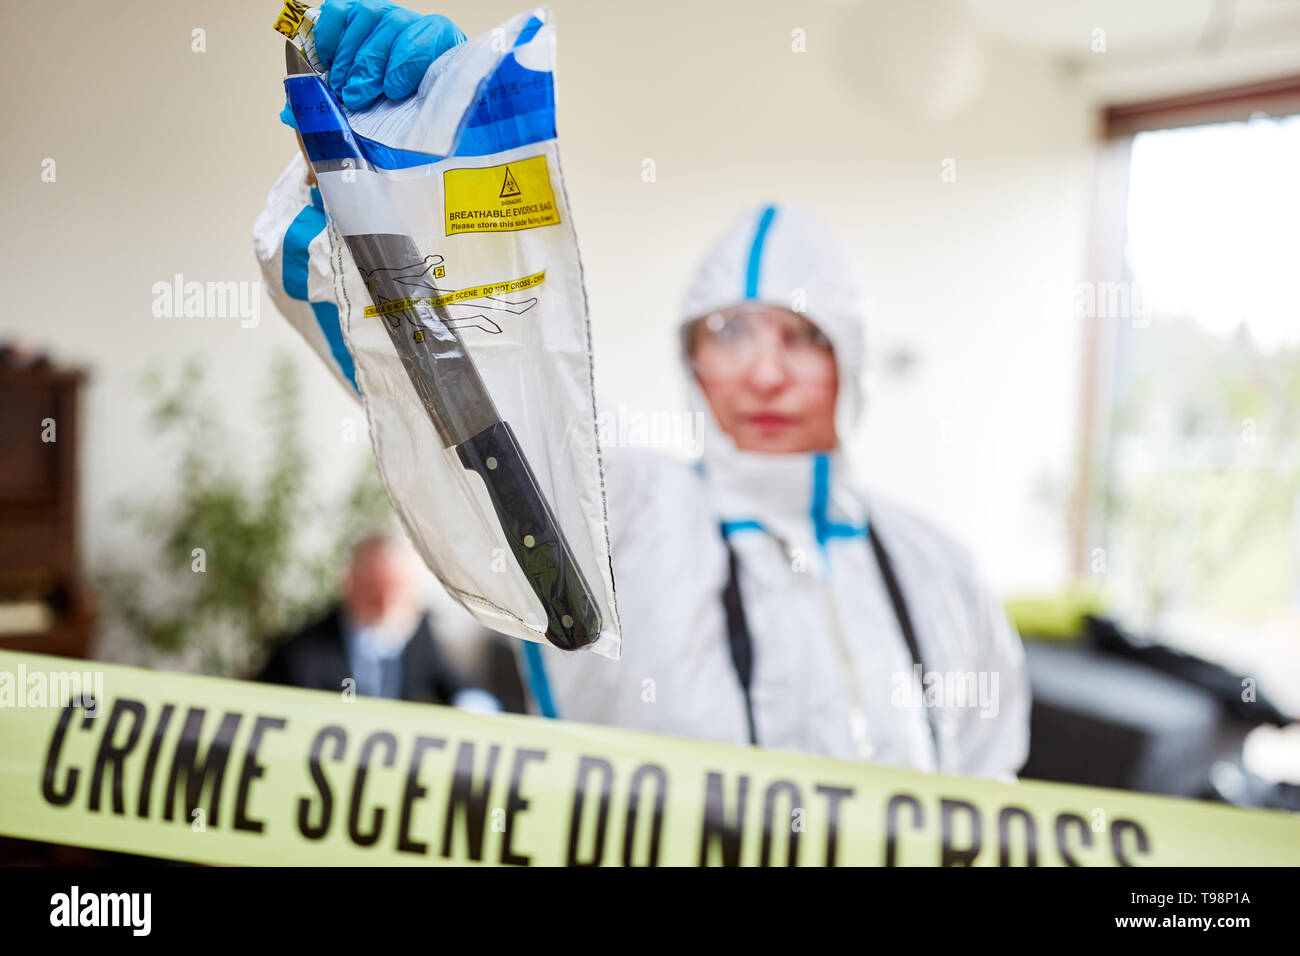 Police forensic officers ensure knives at a crime scene Stock Photo